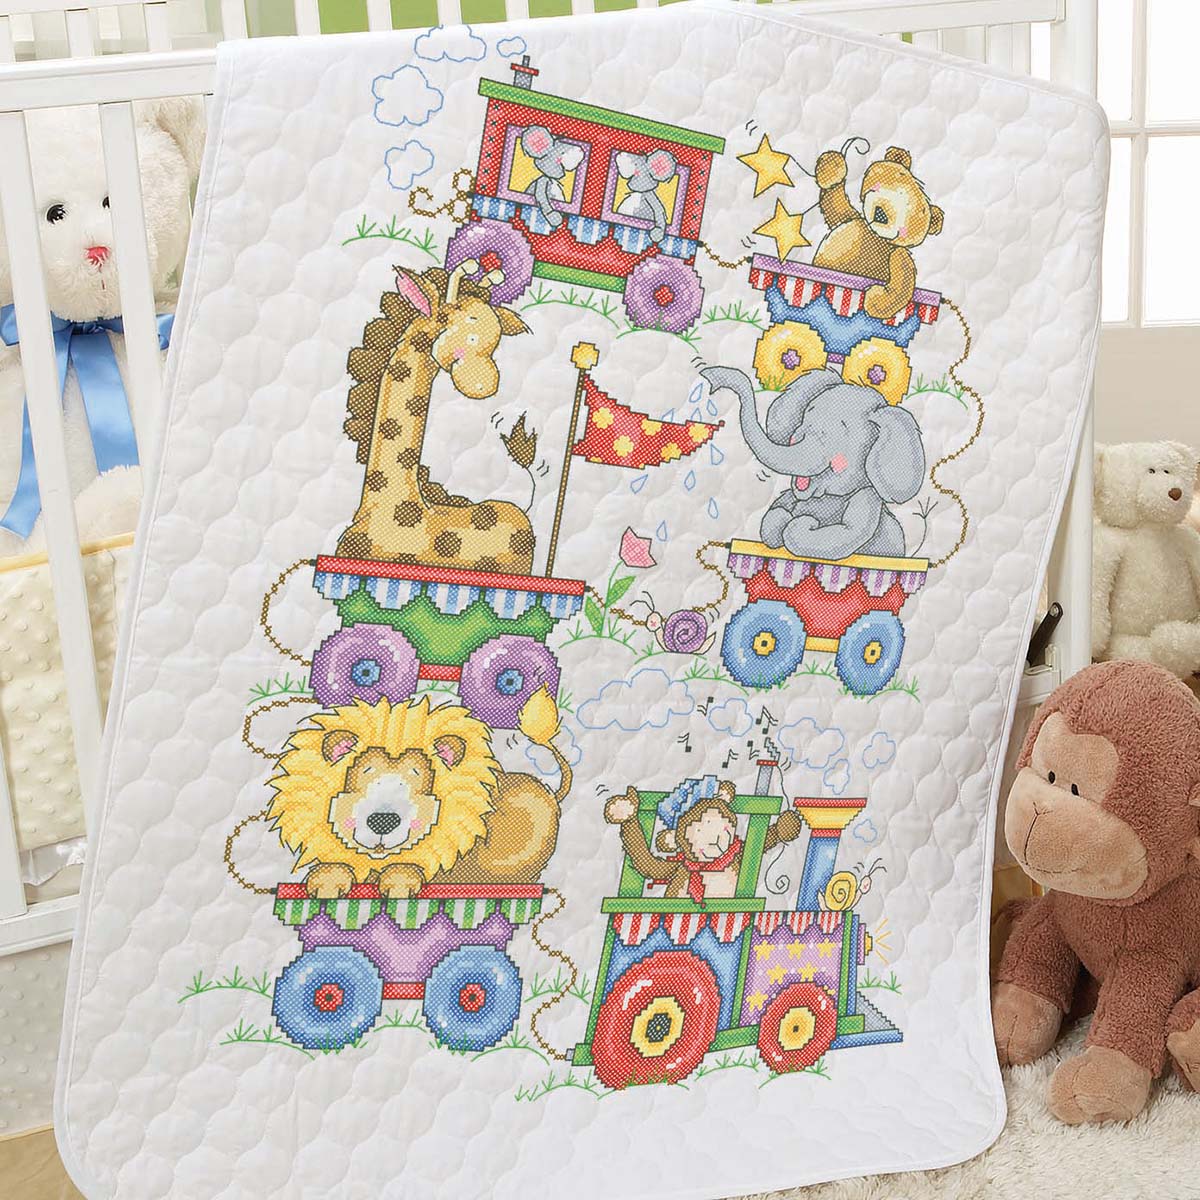 Herrschners Circus Train Baby Quilt Stamped Cross-Stitch Kit